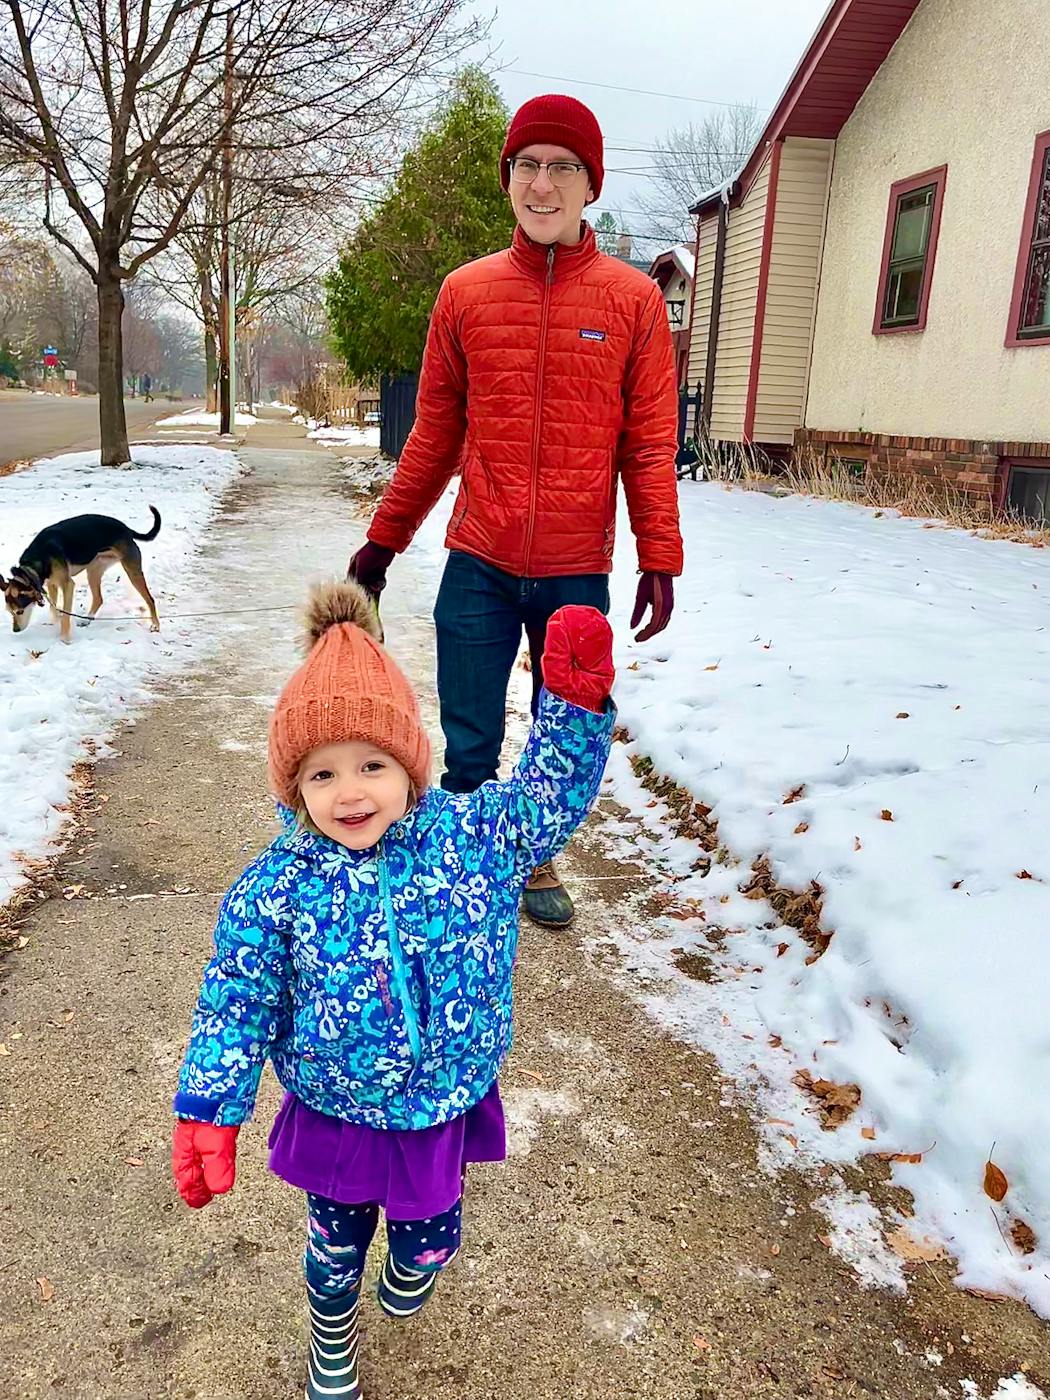 Dr. Chase Shutak, a pediatrician at Children’s Minnesota, took a wintry walk with daughter Solveigh, who on this day acquiesced to warm clothing.